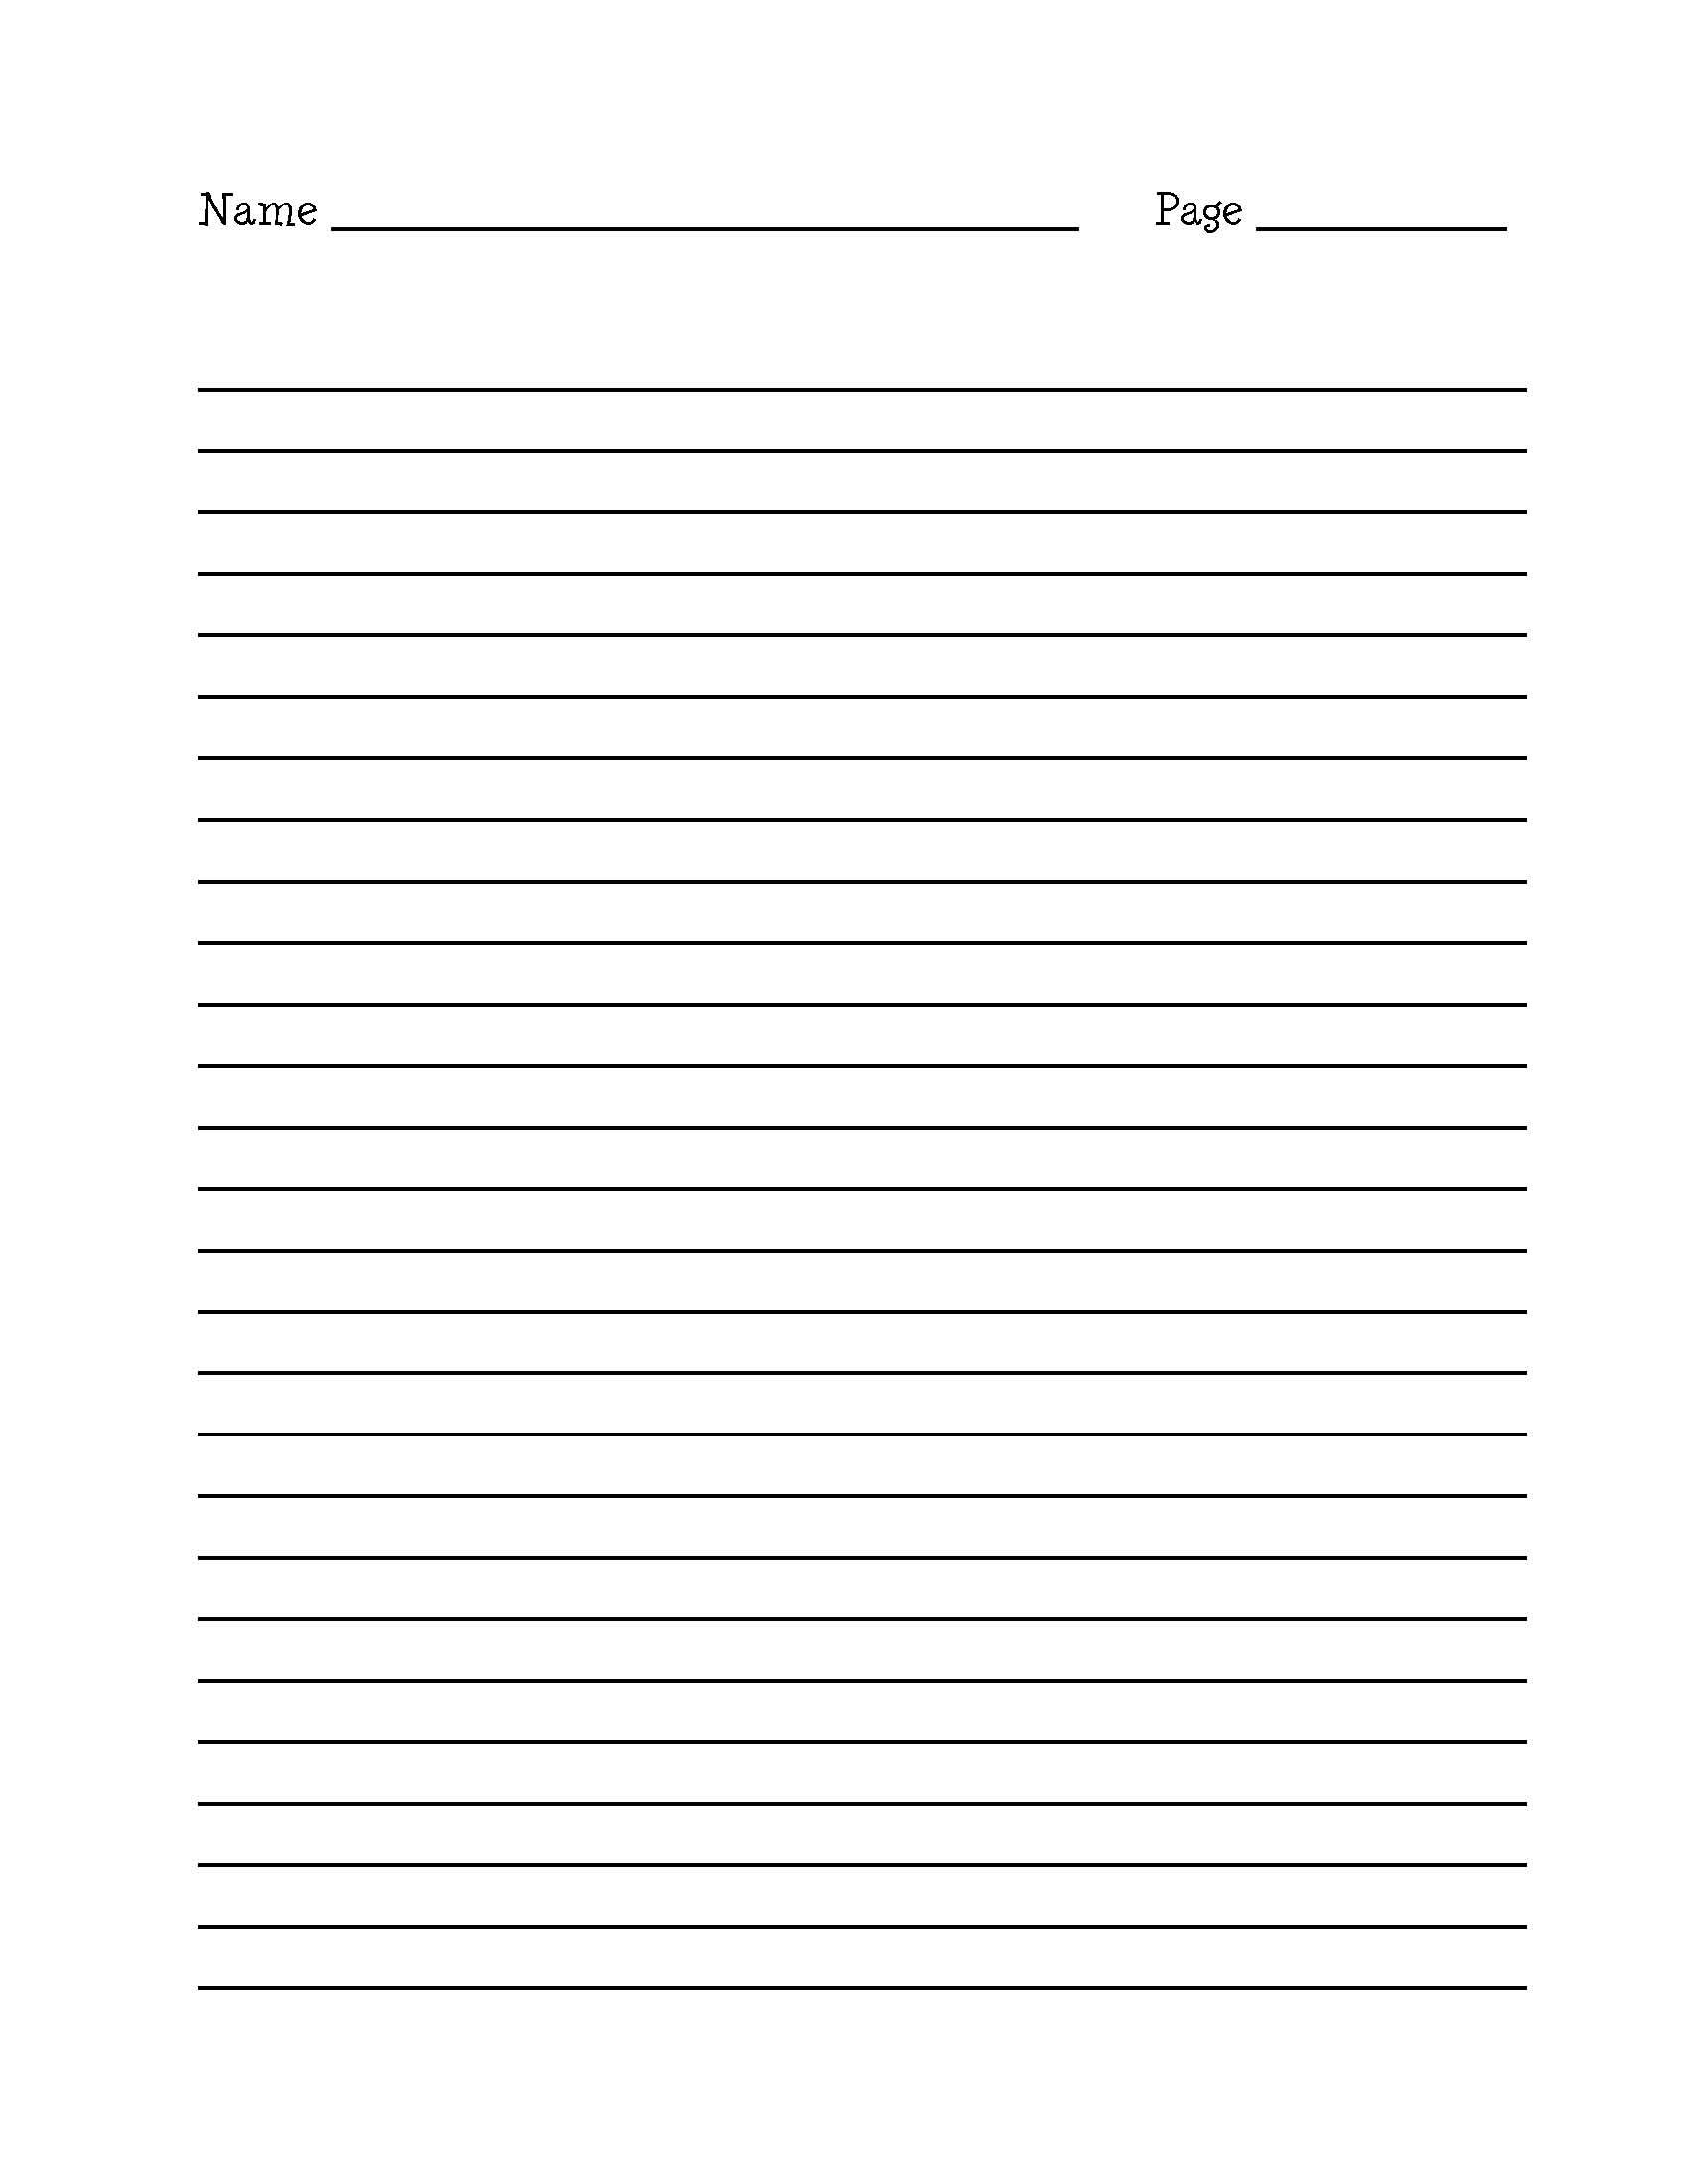 Blank Editable Lined Paper Template Word Pdf | Lined Paper Template - Free Printable Lined Paper